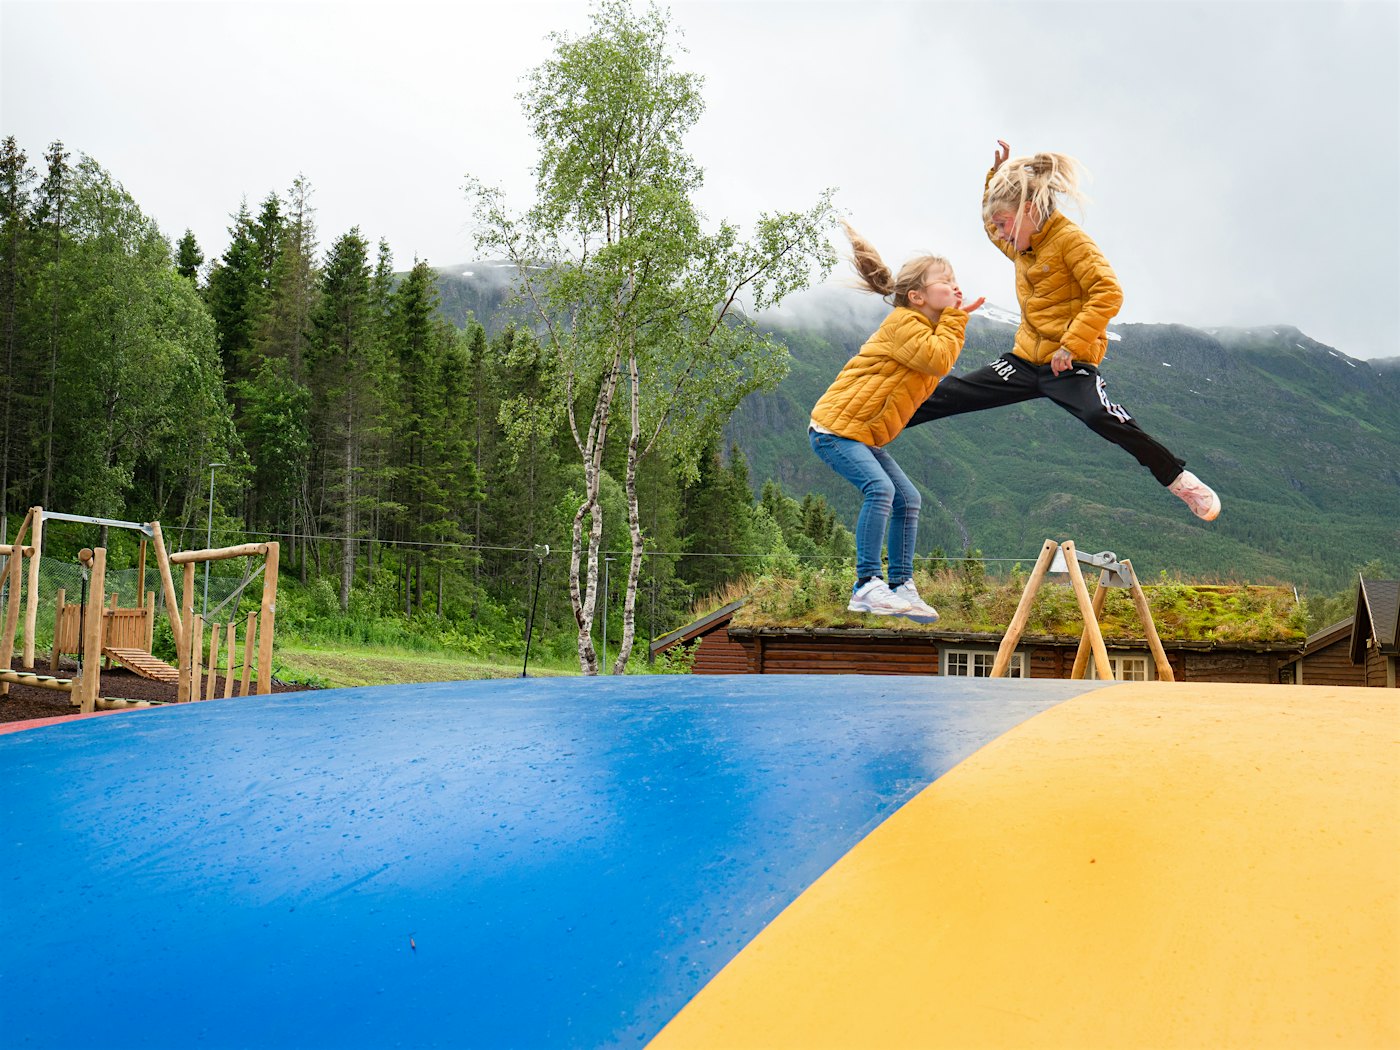 Two girls jump on a bouncy cushion with a playground and mountains in the background. Photo